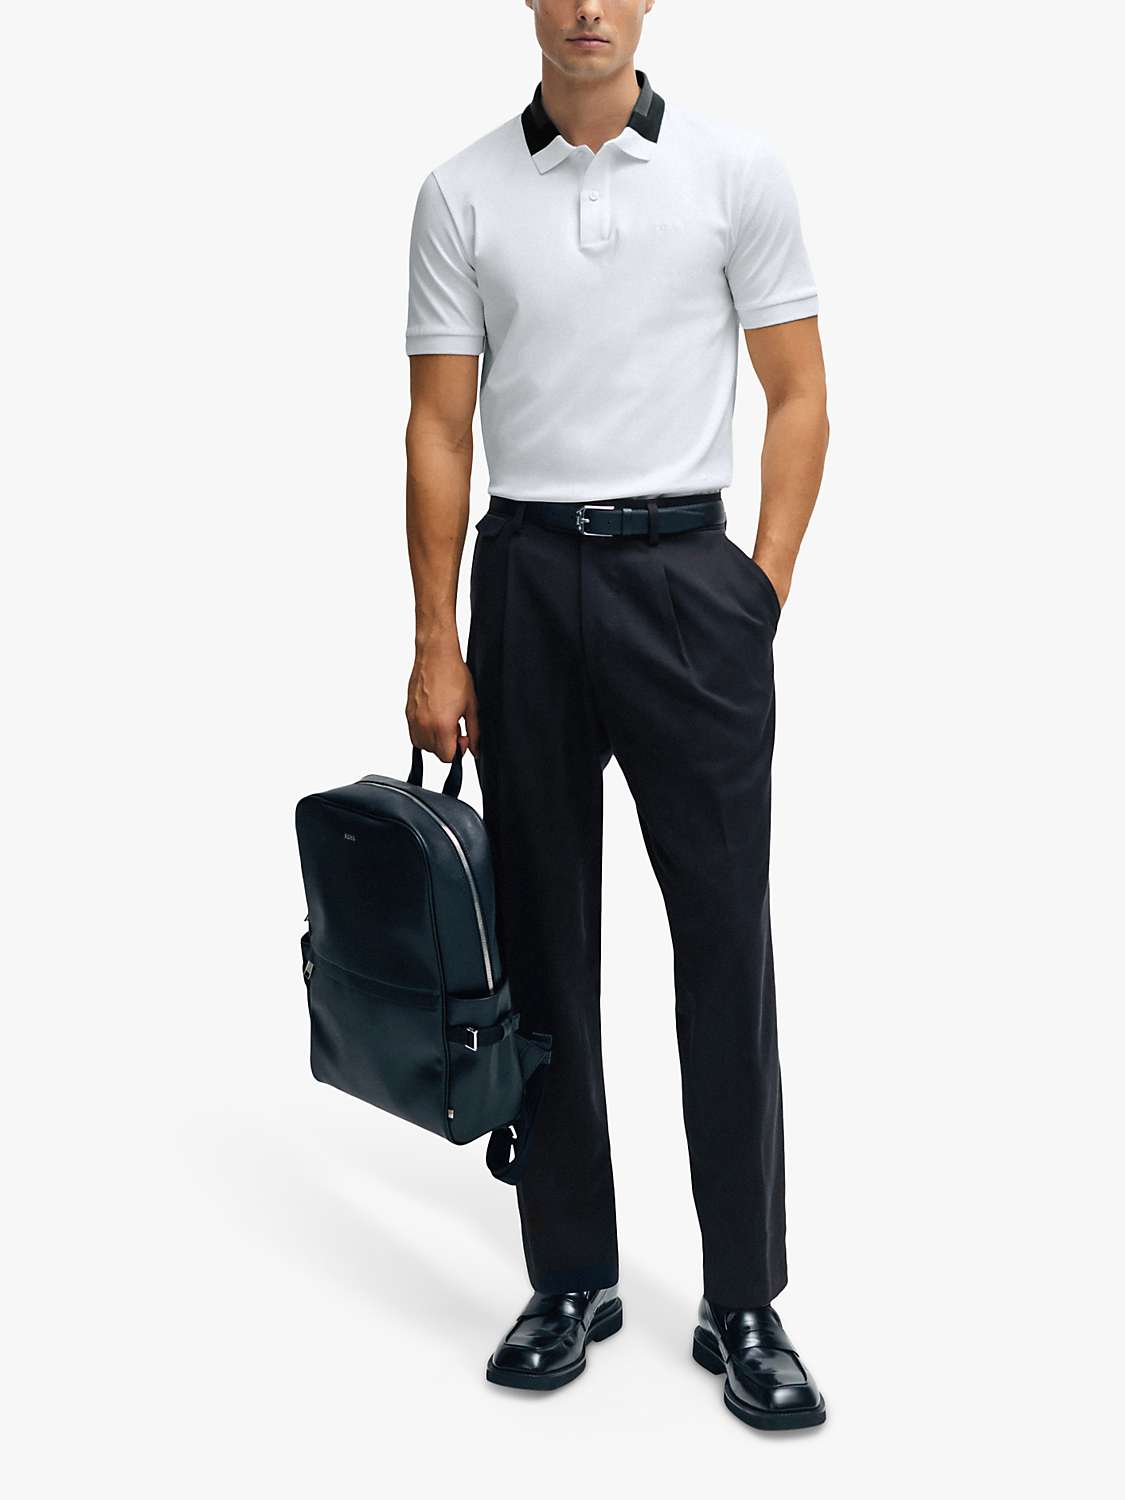 Buy BOSS Phillipson Sporty Polo Shirt Online at johnlewis.com